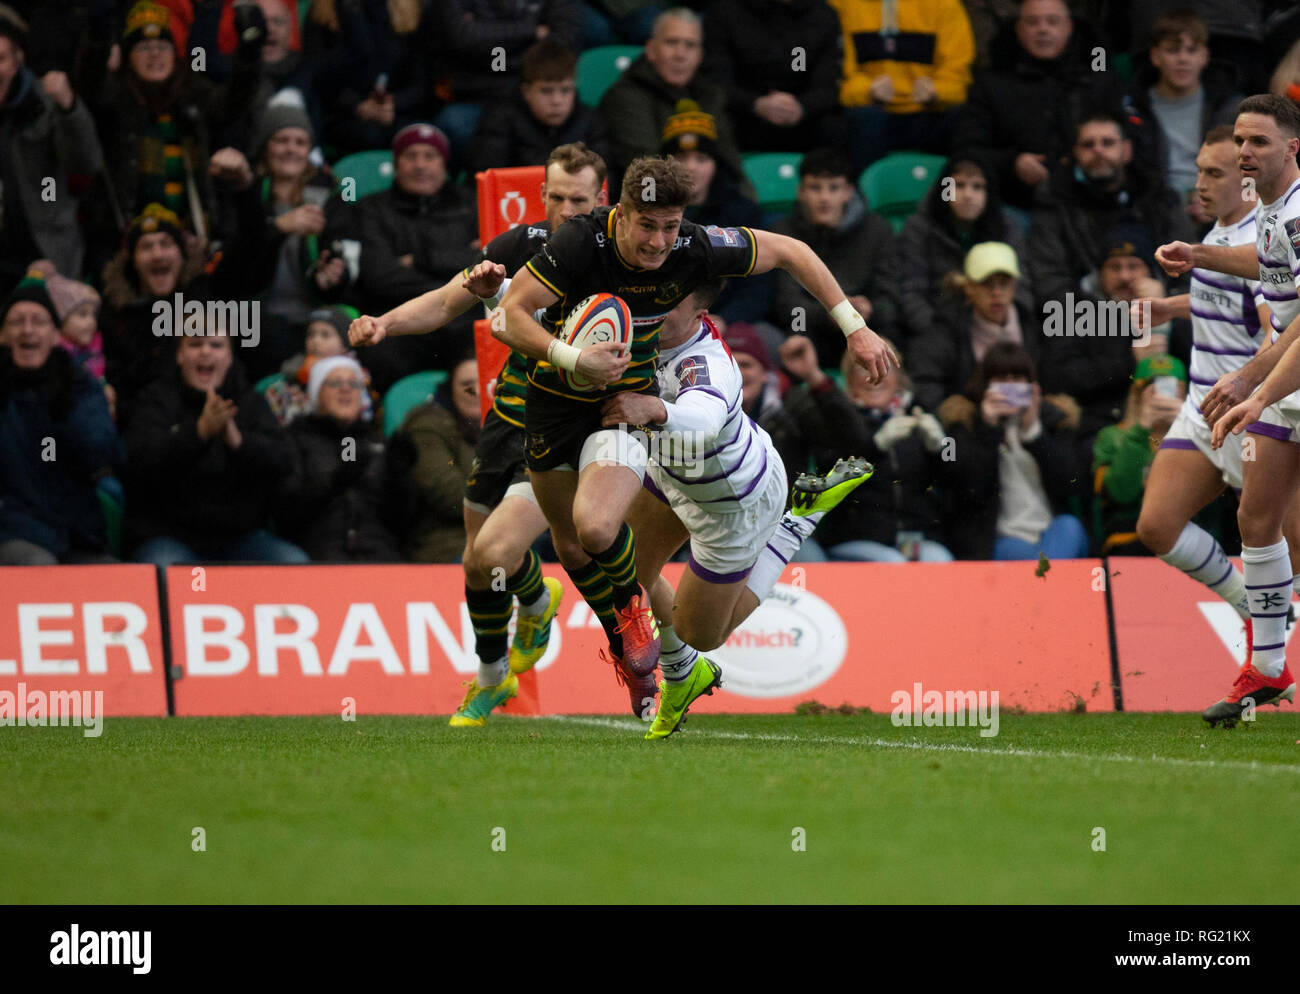 Northampton, UK. 26th January 2019. James Grayson of Northampton Saints scores a try during the Premiership Rugby Cup match between Northampton Saints and Leicester Tigers. Andrew Taylor/Alamy Live News Stock Photo